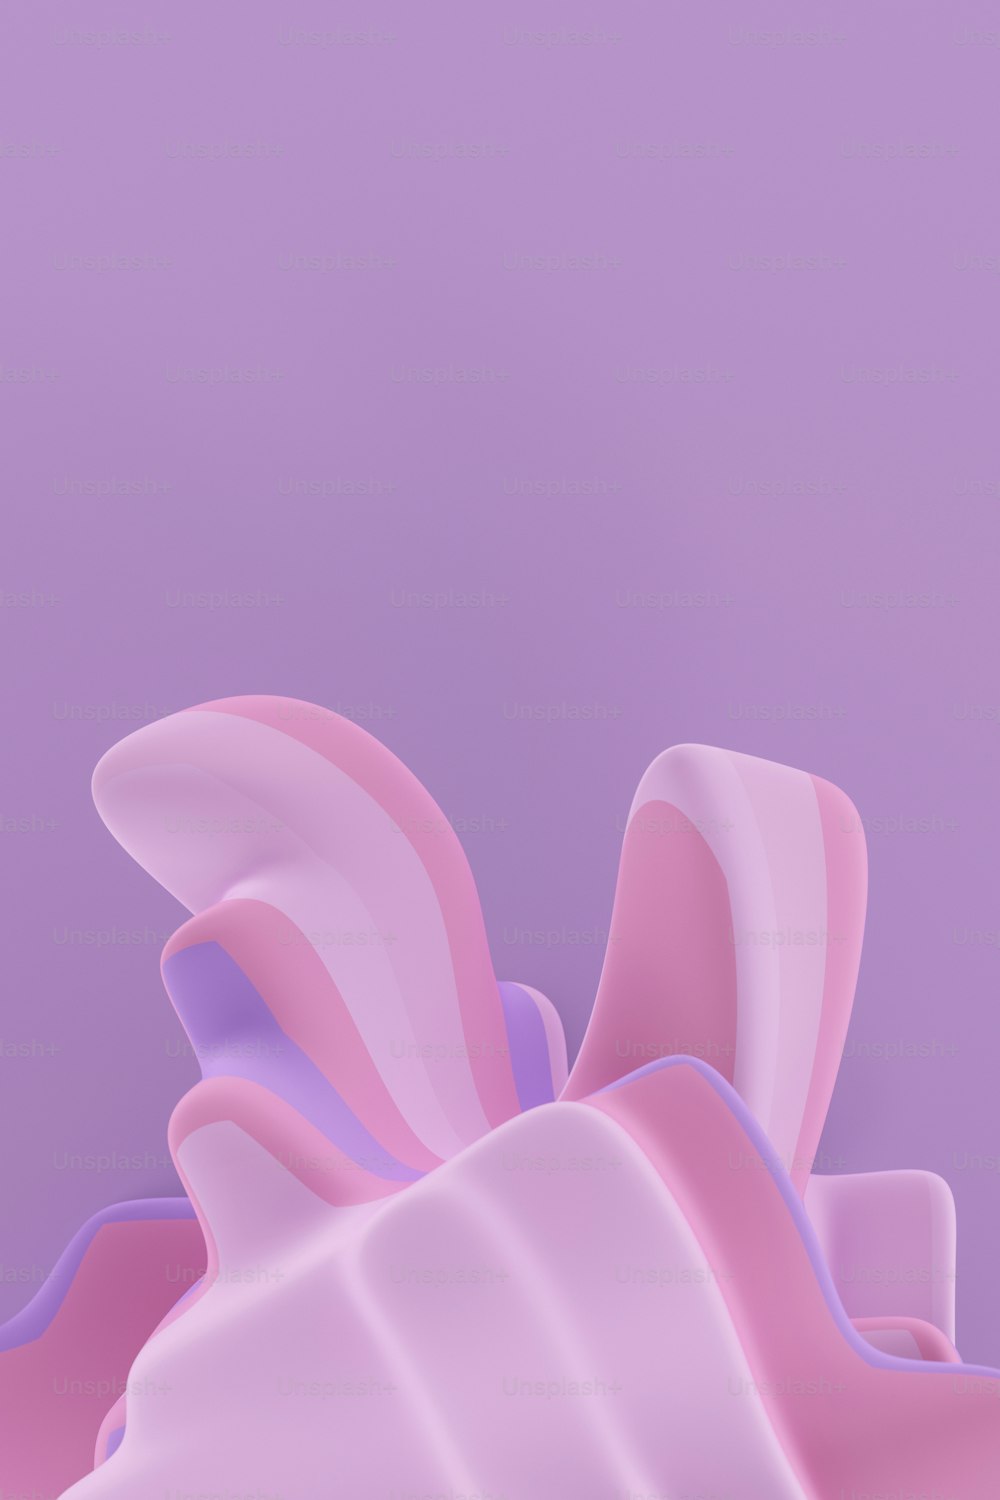 a purple and pink abstract background with wavy shapes